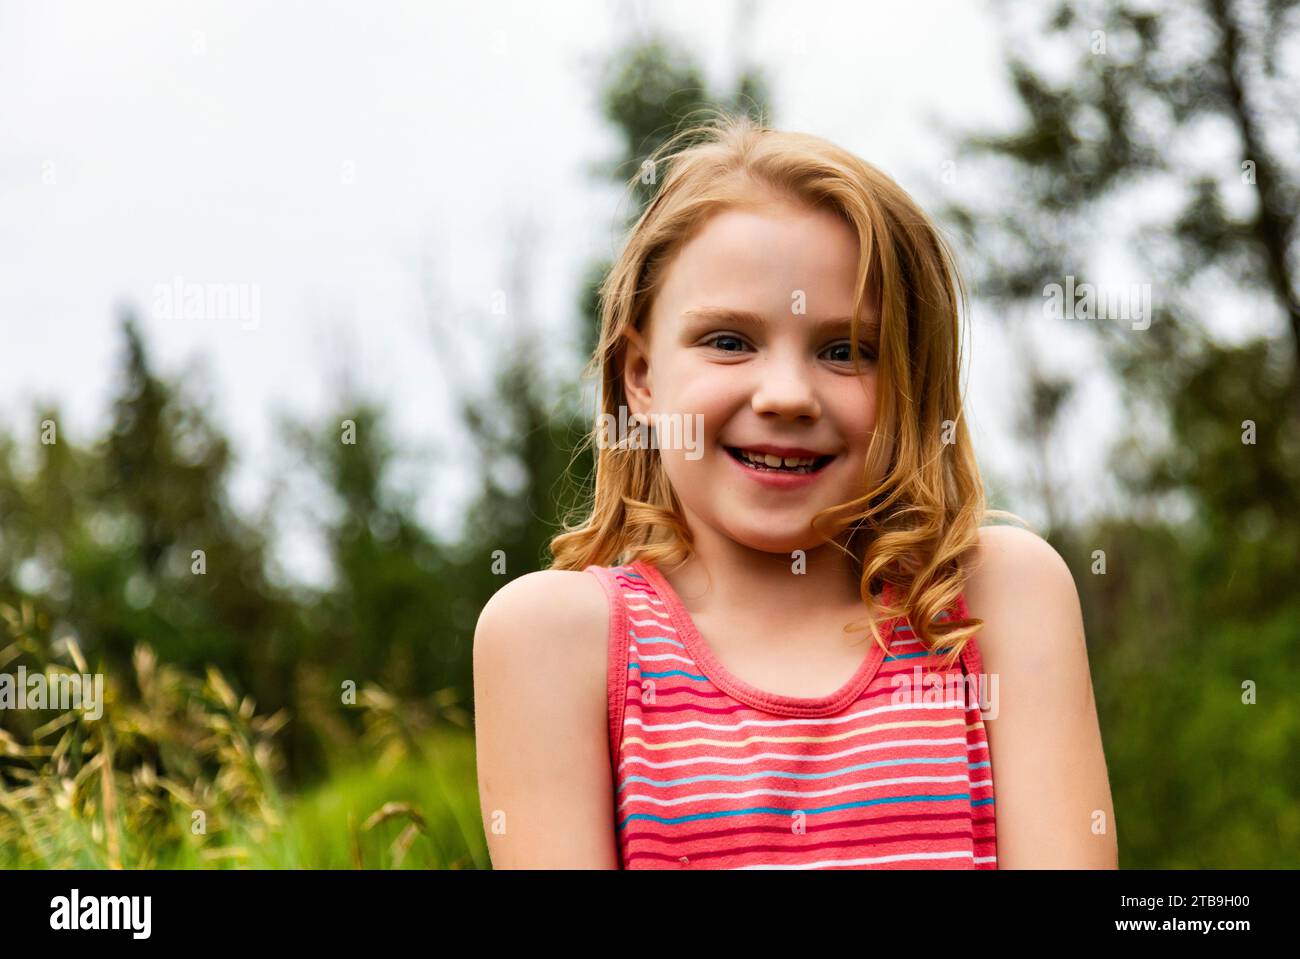 Portrait of a young girl in a park, smiling at the camera; Edmonton, Alberta, Canada Stock Photo